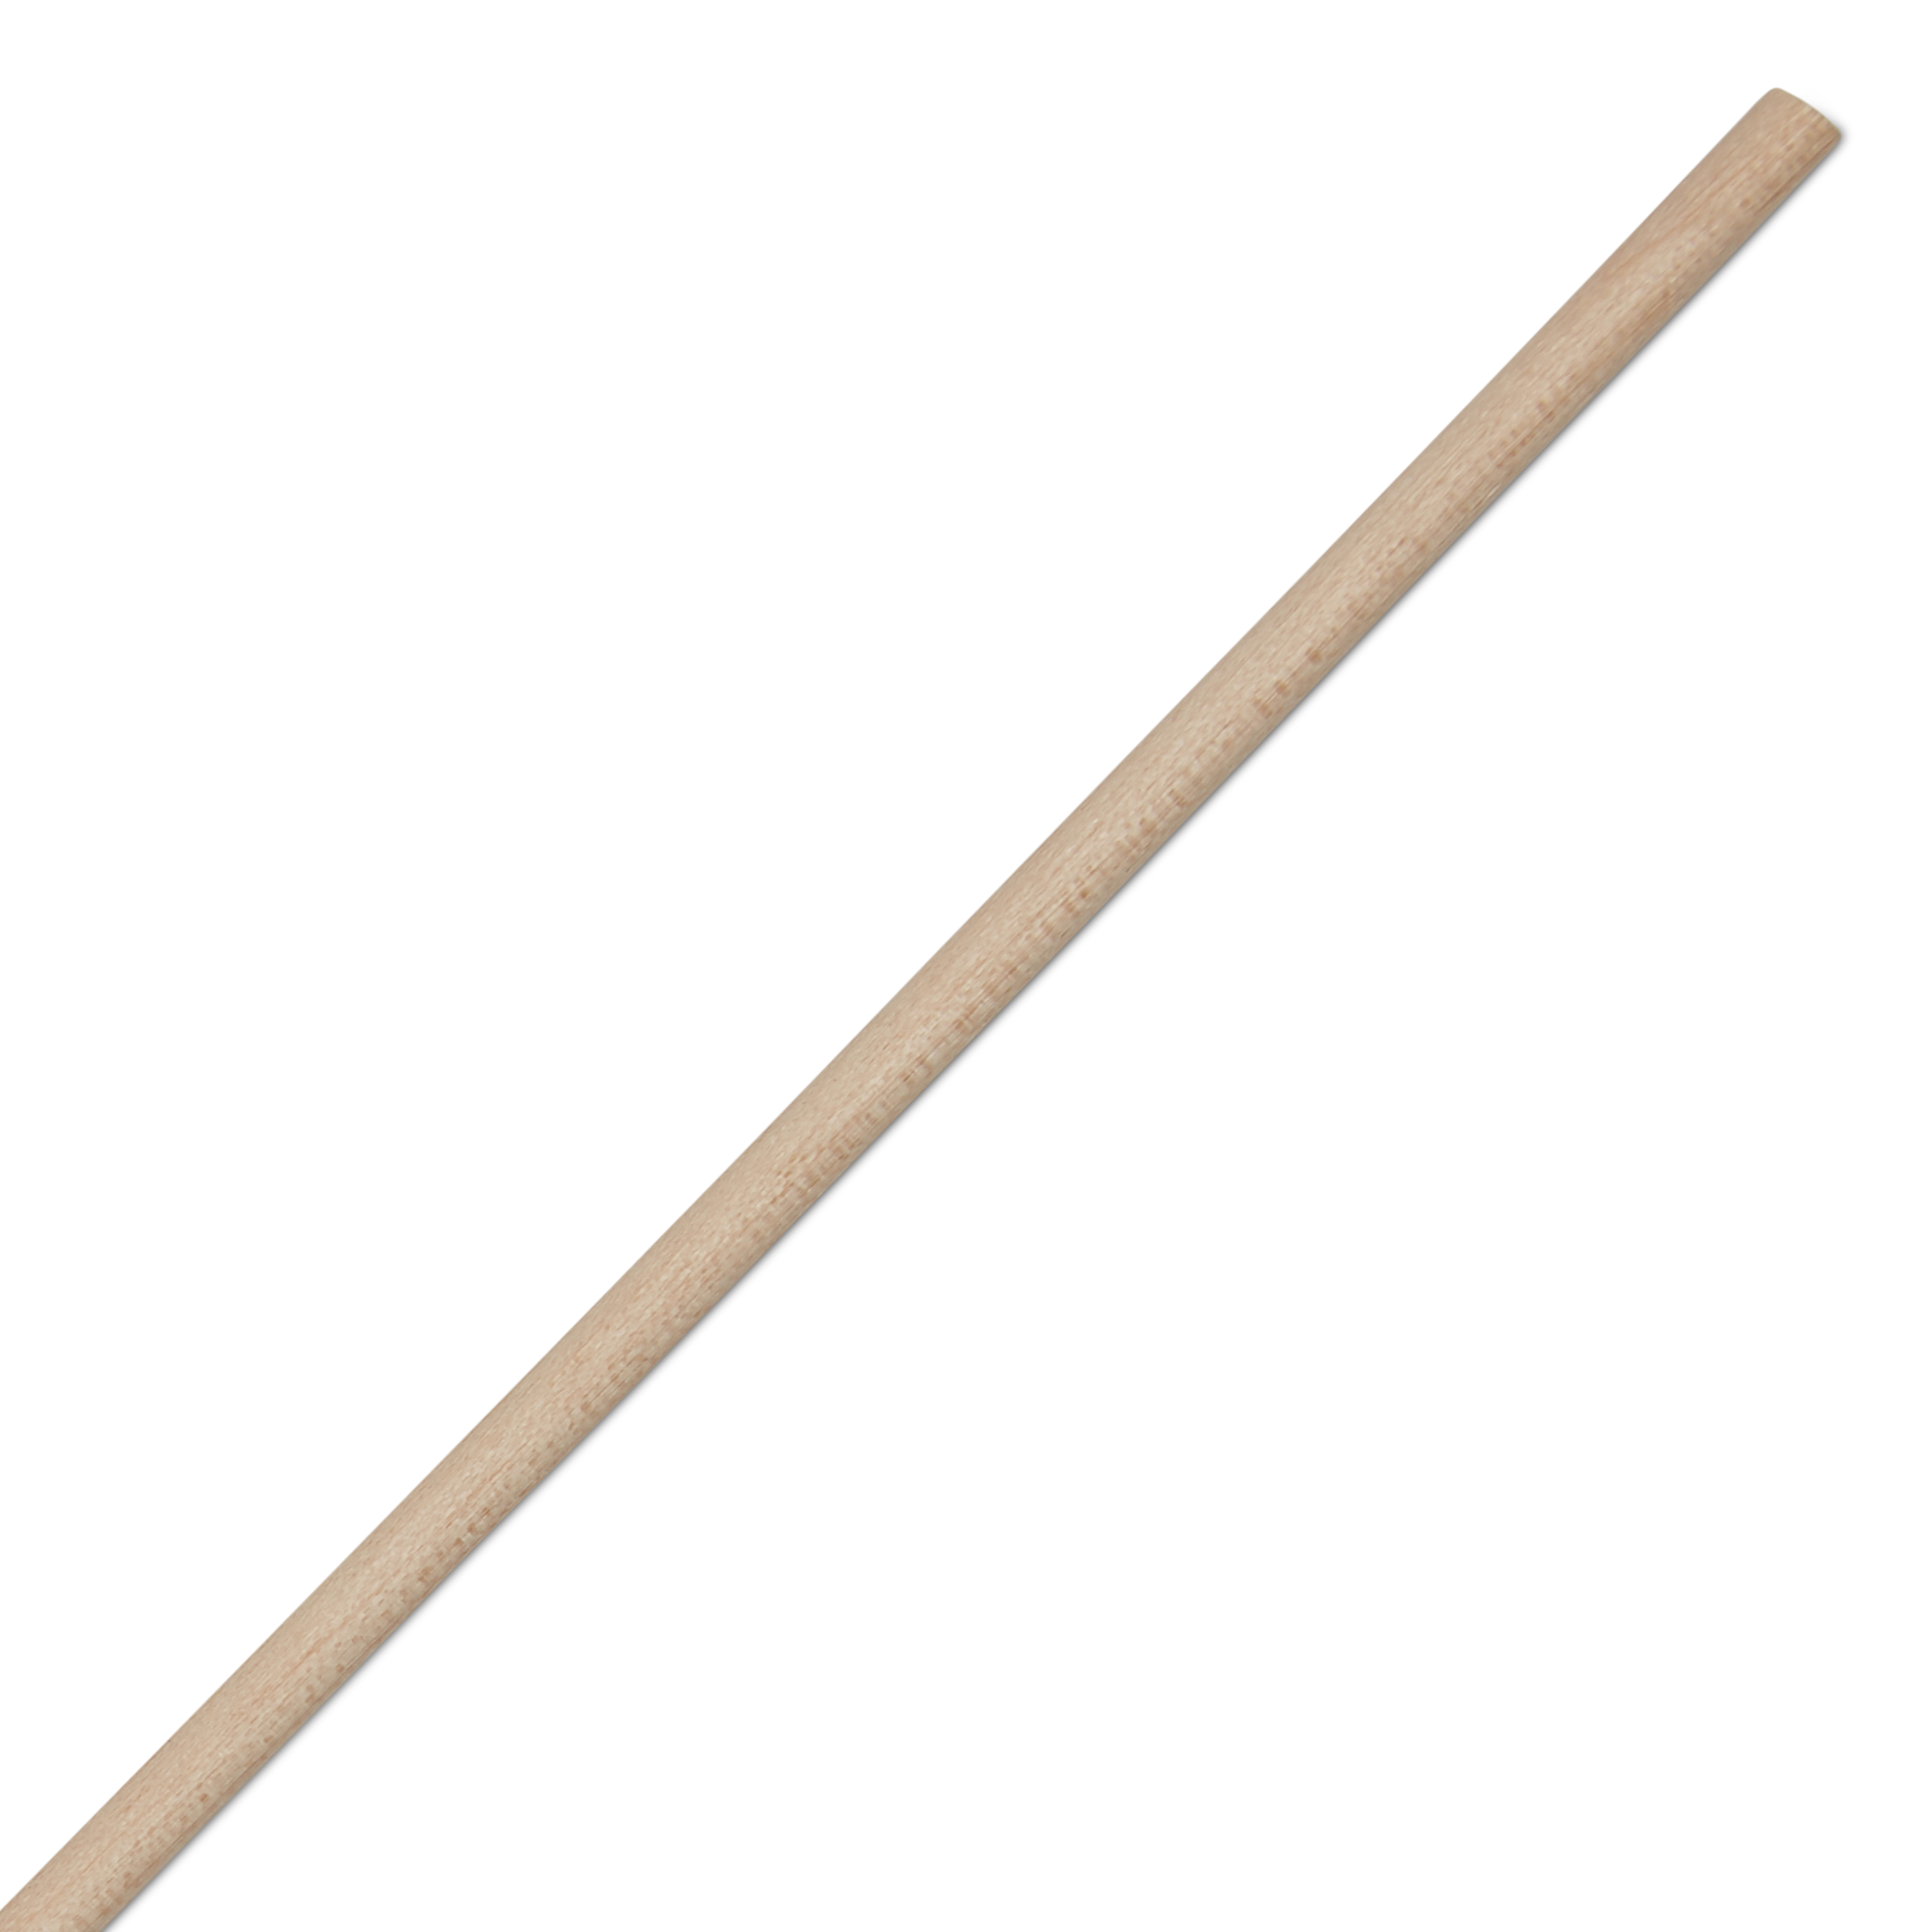 Dowel Rods Wood Sticks Wooden Dowel Rods - 1/8 x 12 Inch Unfinished  Hardwood Sticks - for Crafts and DIYers - 50 Pieces by Woodpeckers 